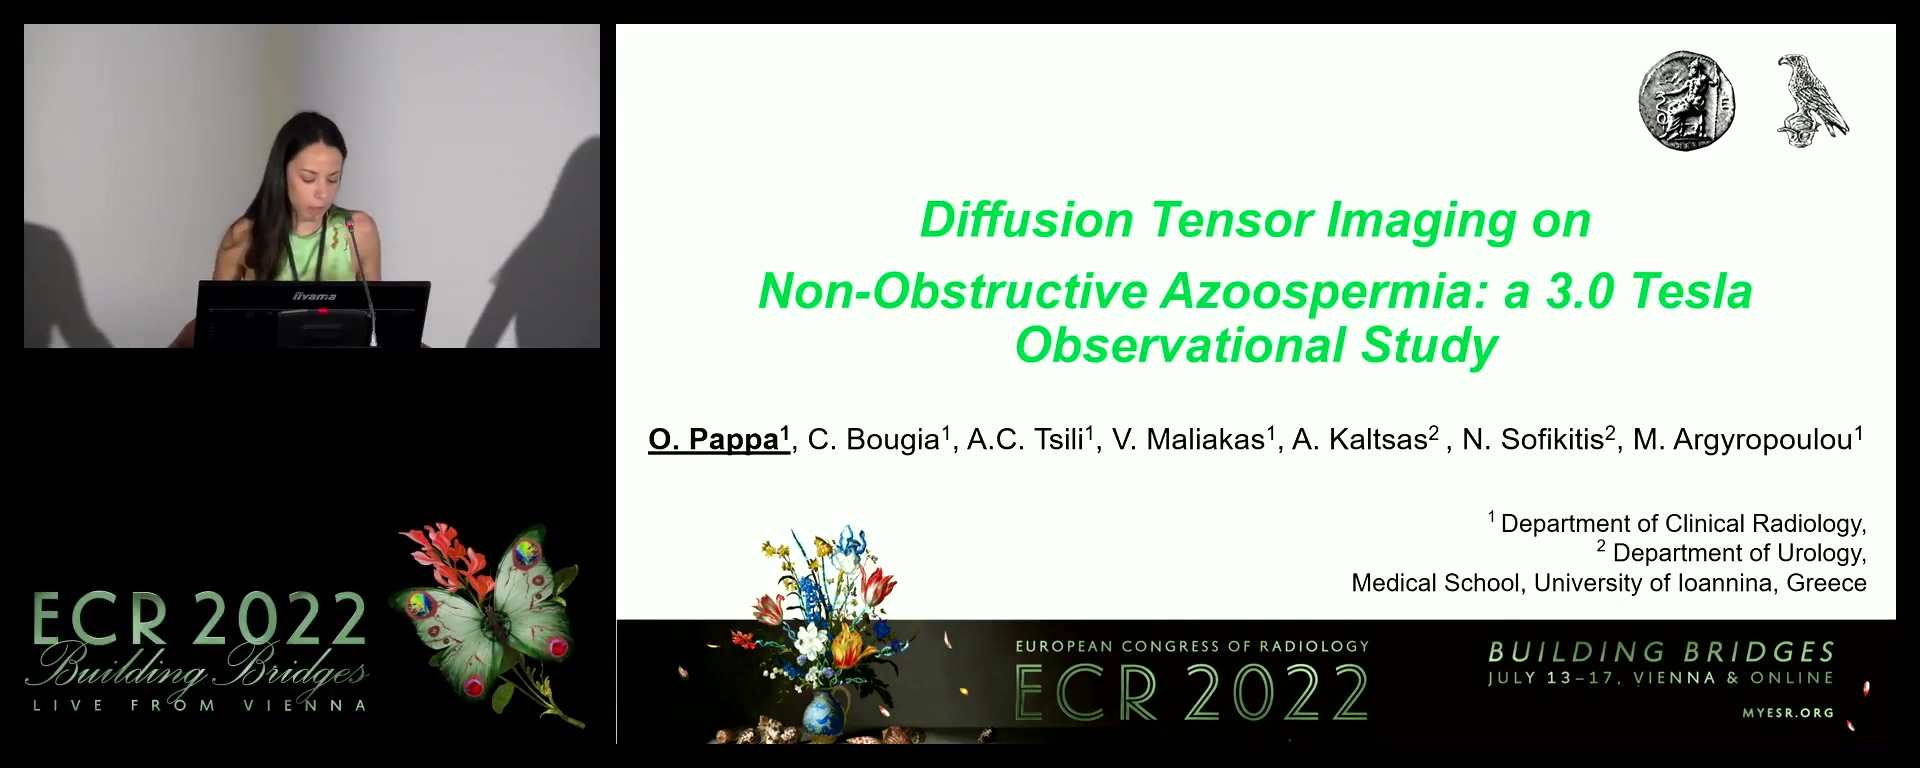 Diffusion tensor imaging and tractography on non-obstructive azoospermia: a 3T observational study